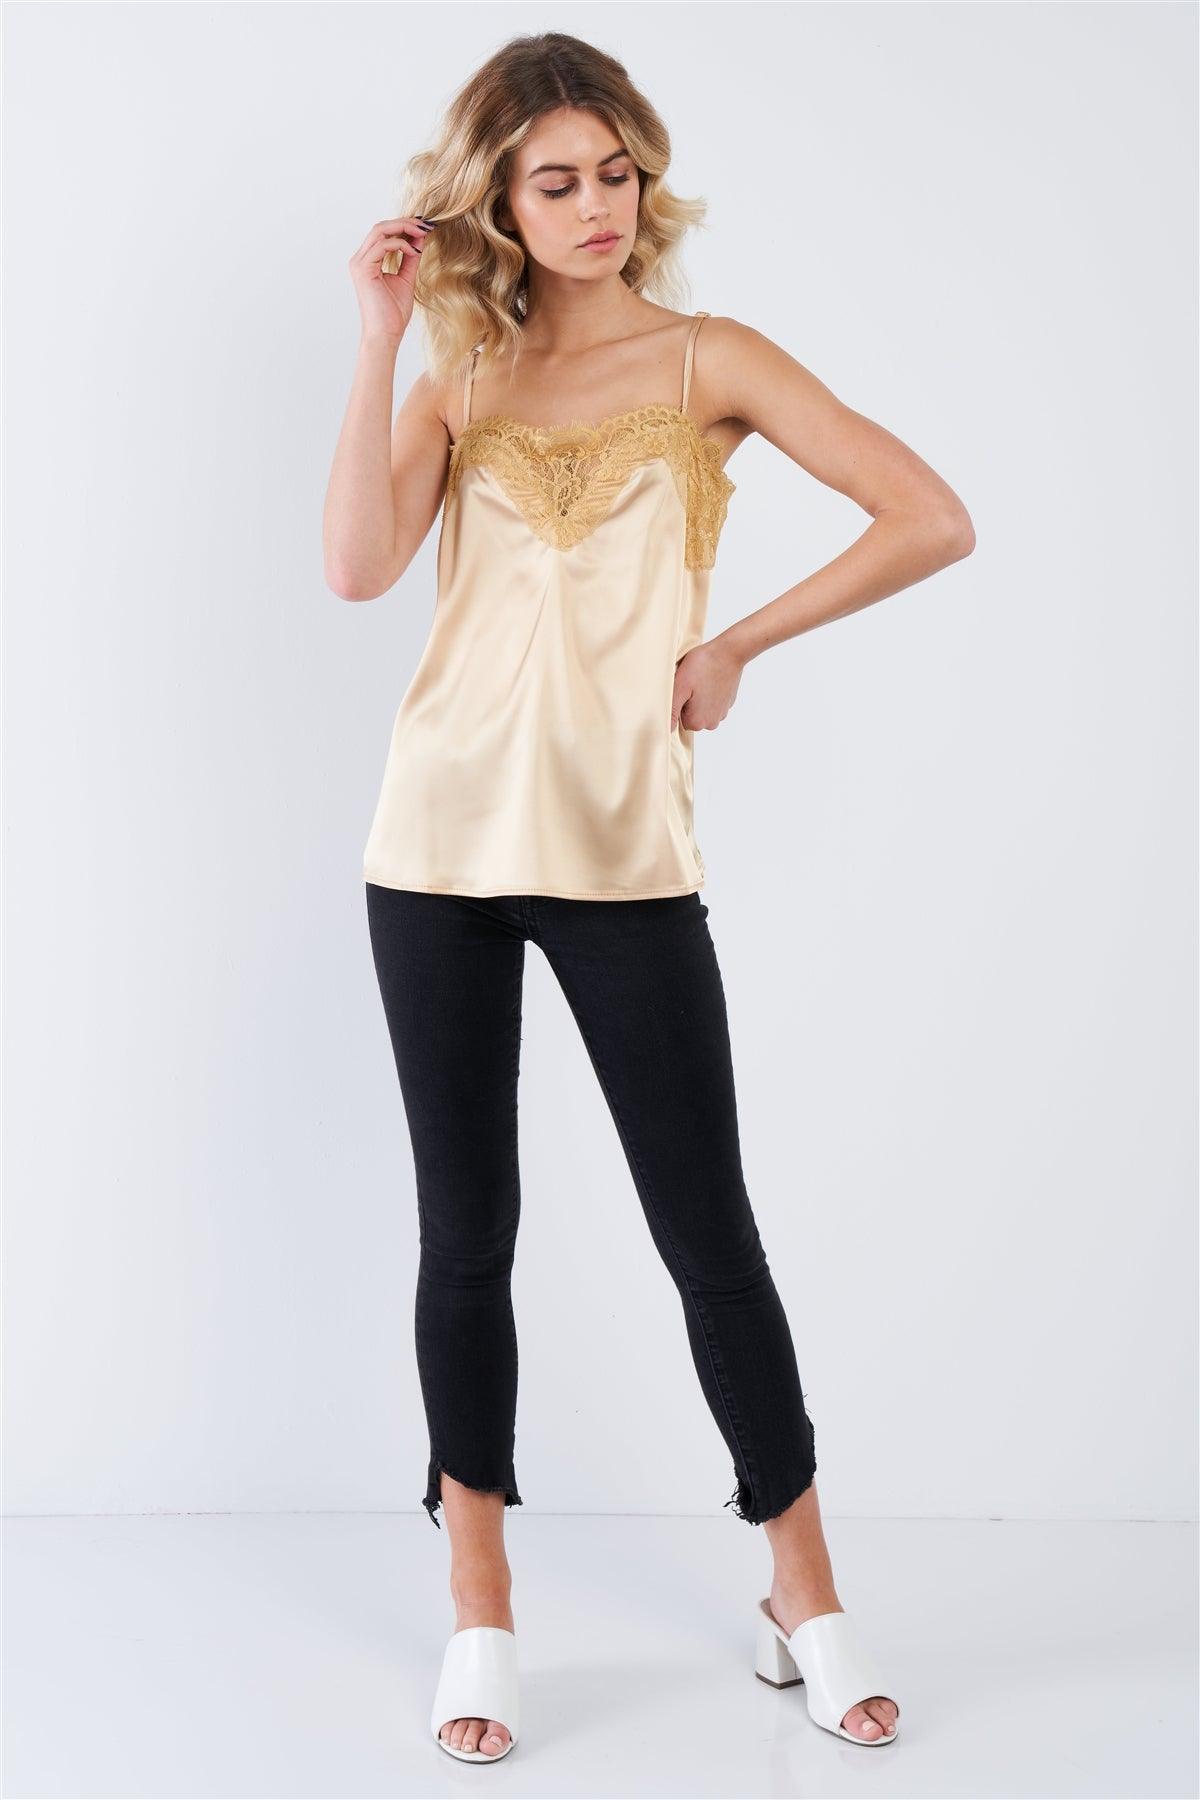 Golden Yellow Satin Lace V-Neck Adjustable Cami Top